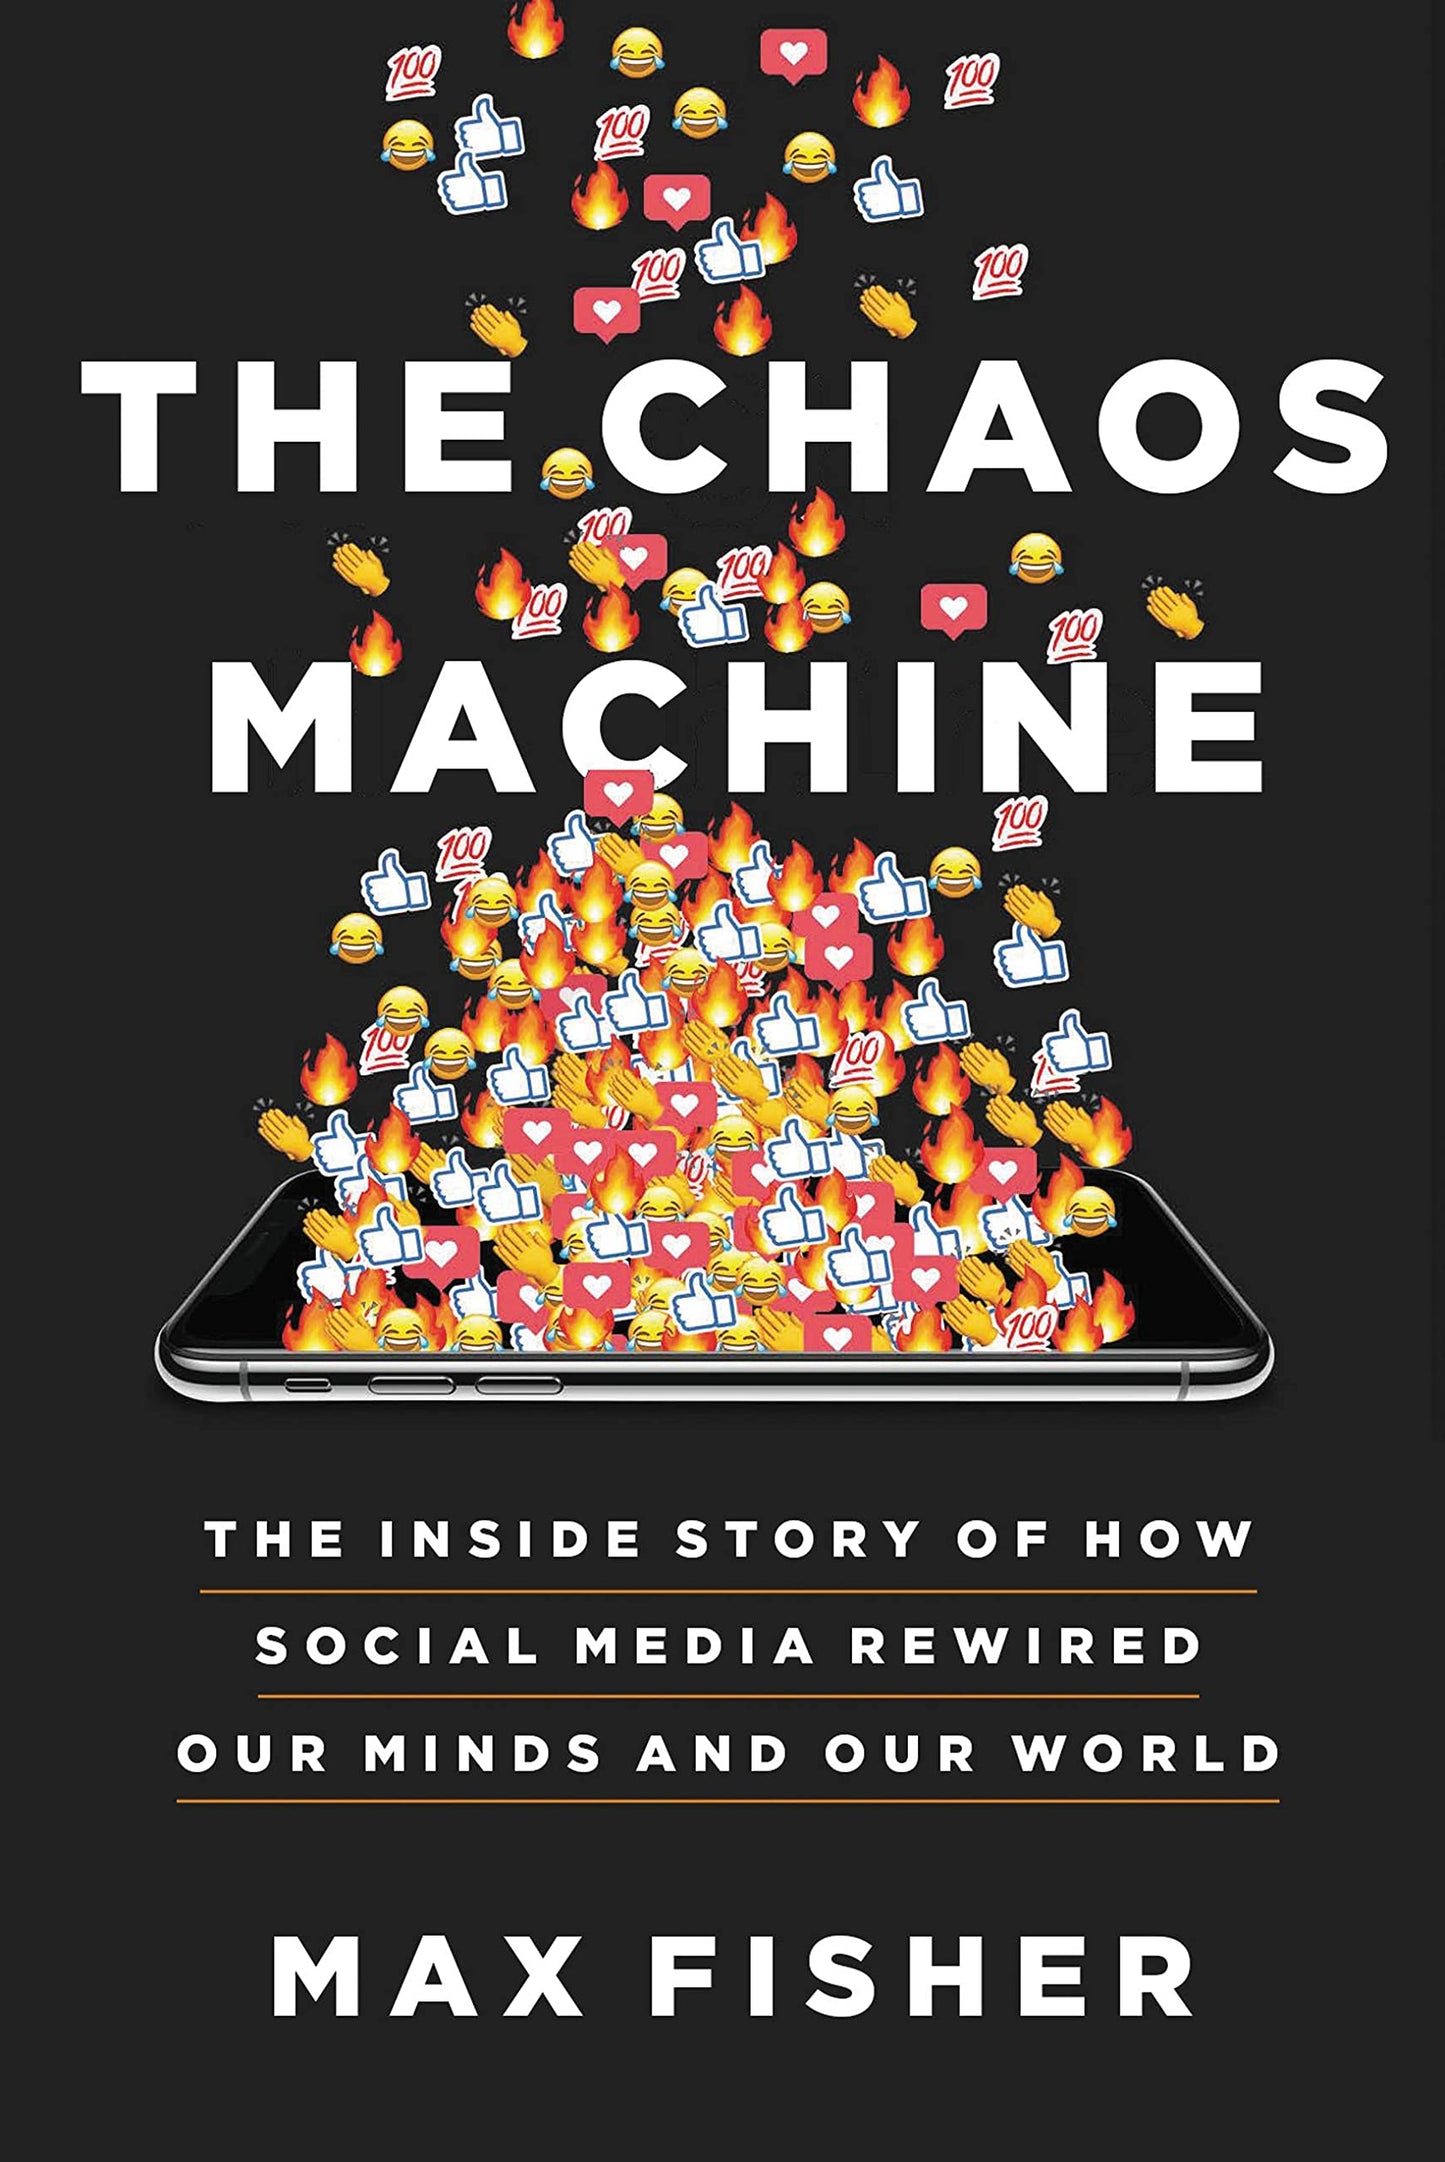 The Chaos Machine, by Max Fisher